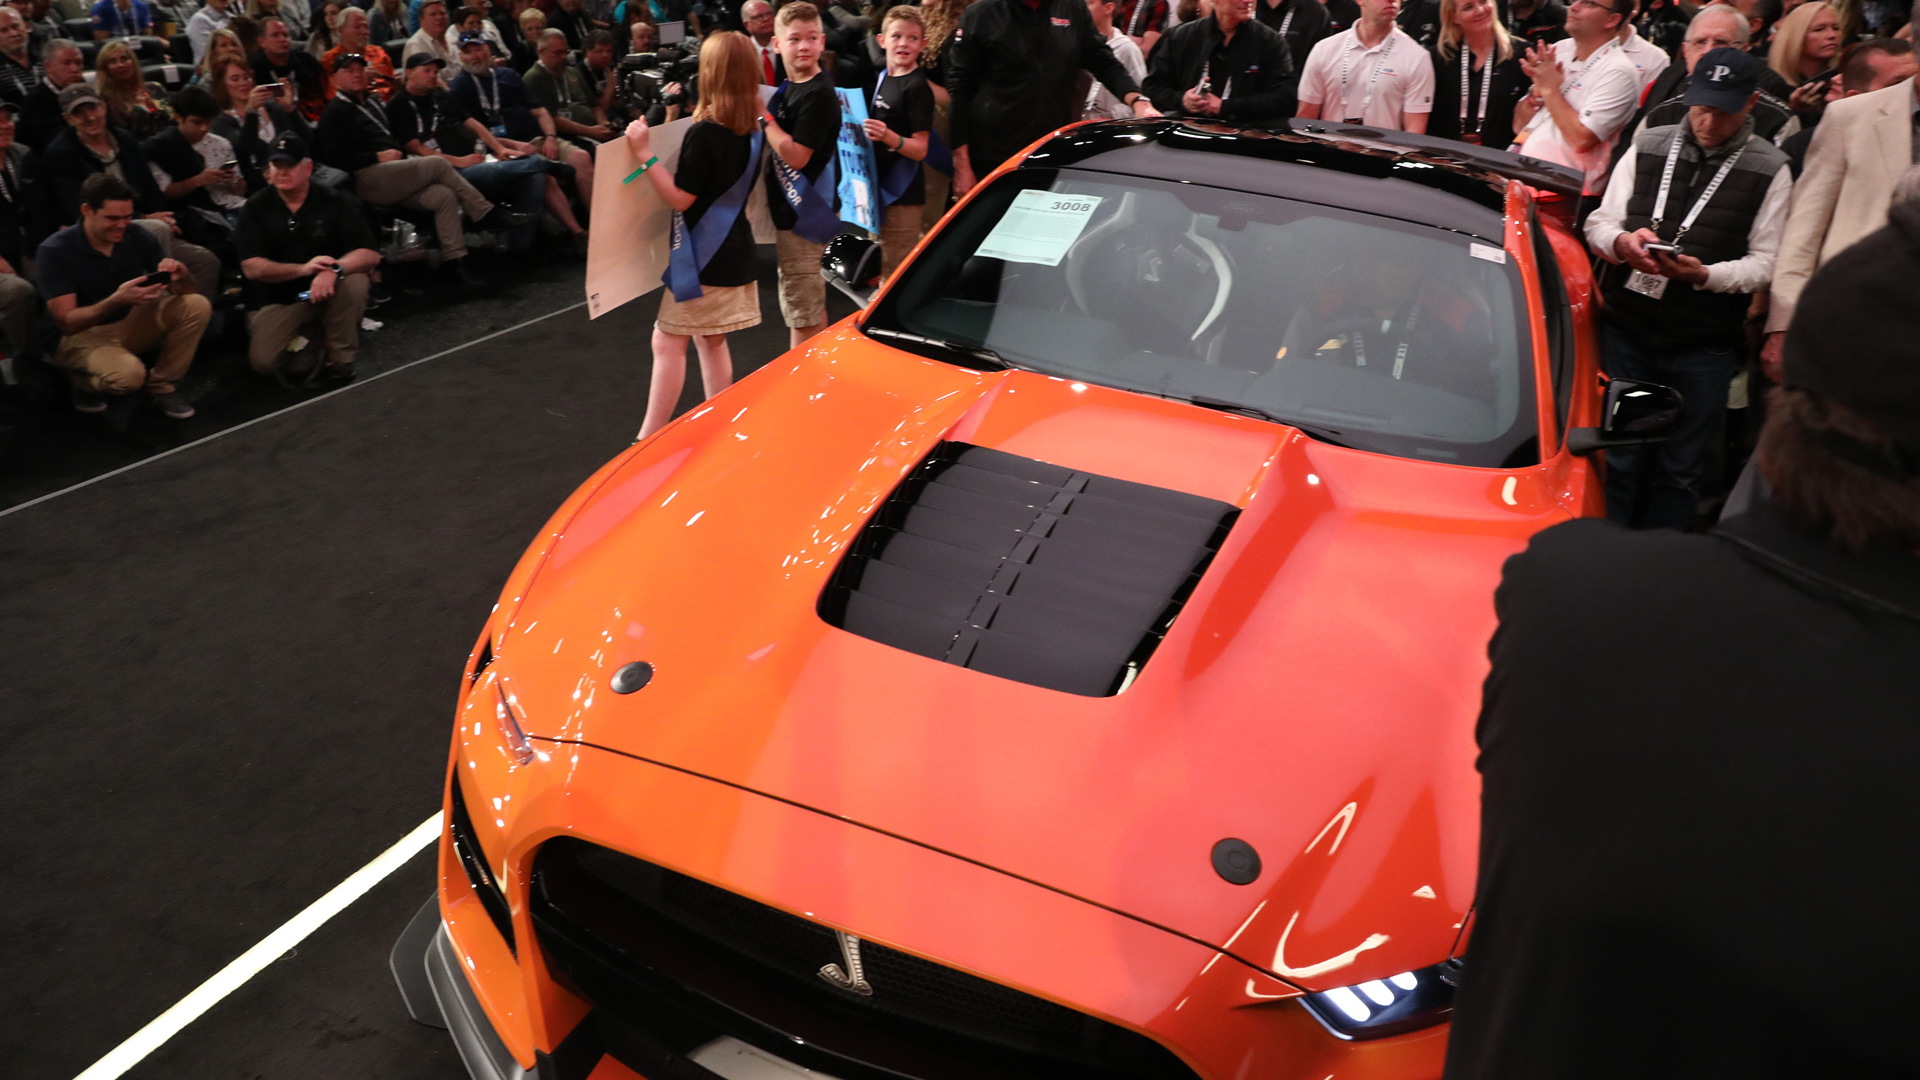 Auction of 2020 Ford Mustang Shelby GT500 with VIN ending in 001 on January 18, 2019